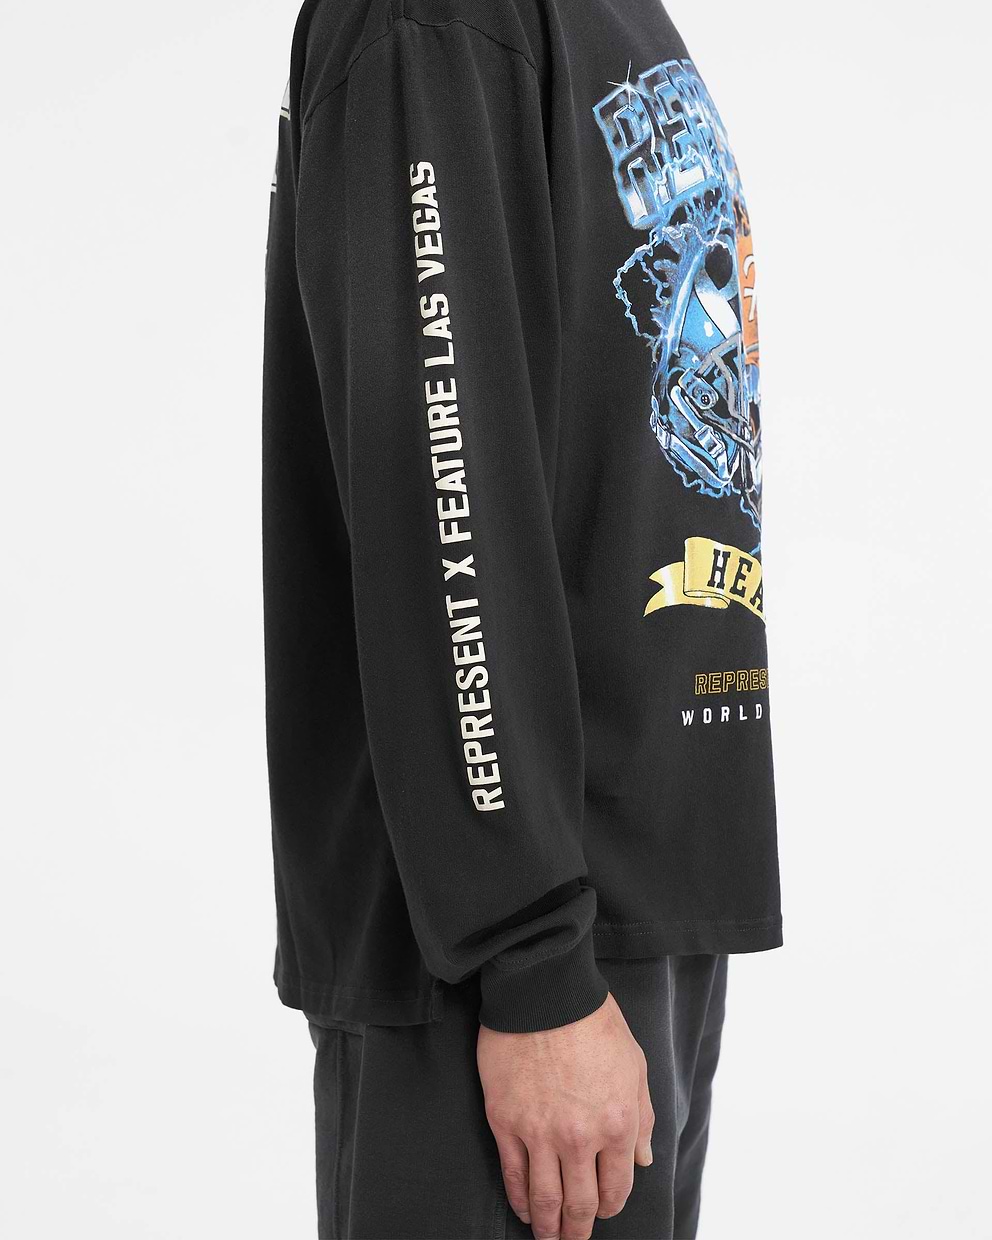 Represent X Feature Head 2 Head Long Sleeve T-Shirt - Stained Black